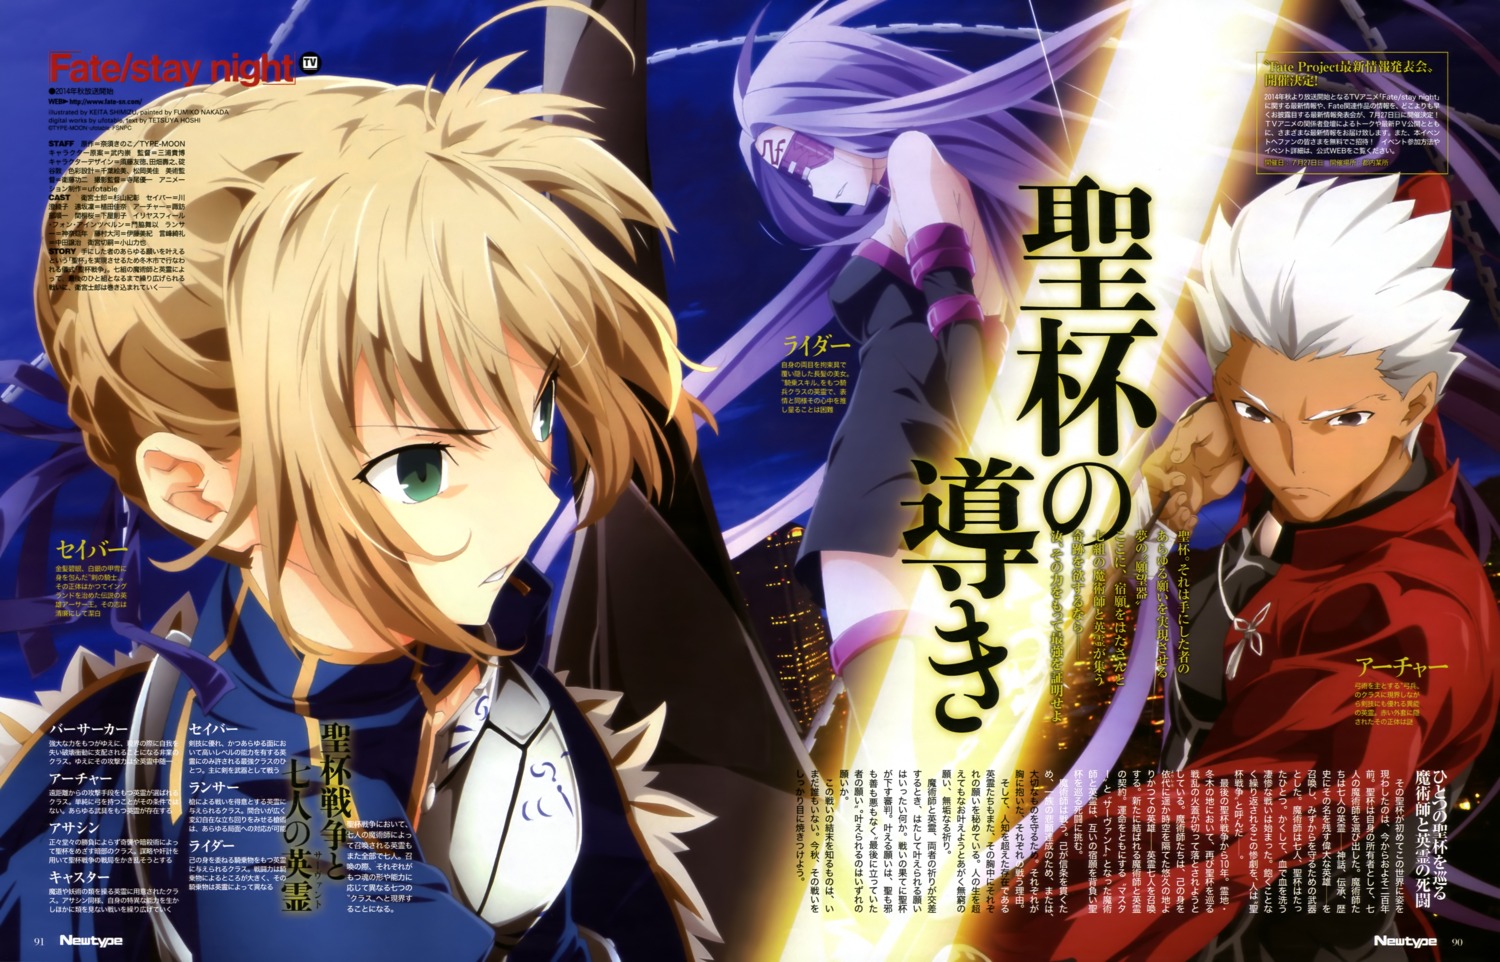 Shimizu Keita Fate Stay Night Fate Stay Night Unlimited Blade Works Archer Rider Saber Armor Sword Weapon 2259 Yande Re